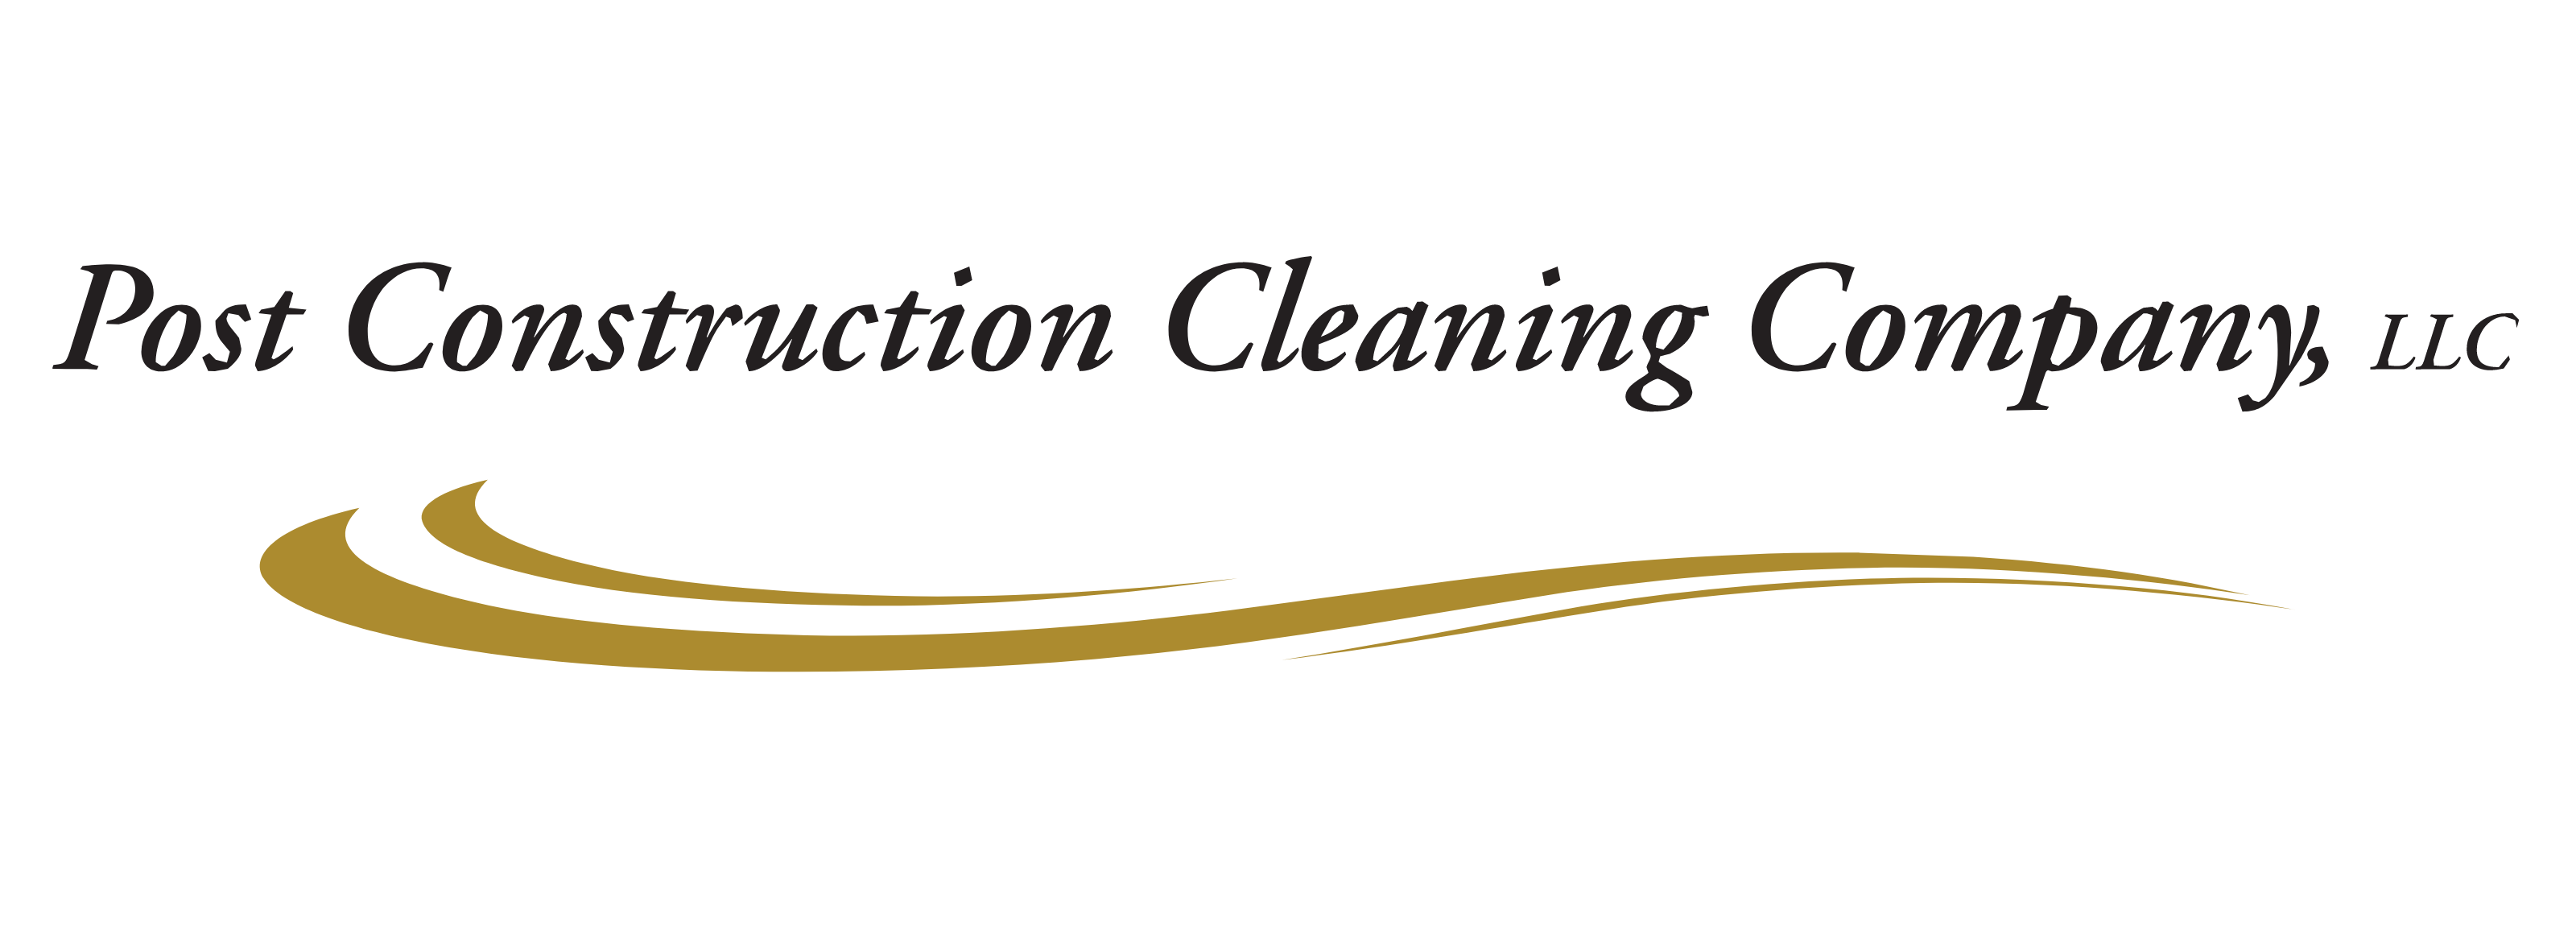 Post Construction Cleaning Company : 